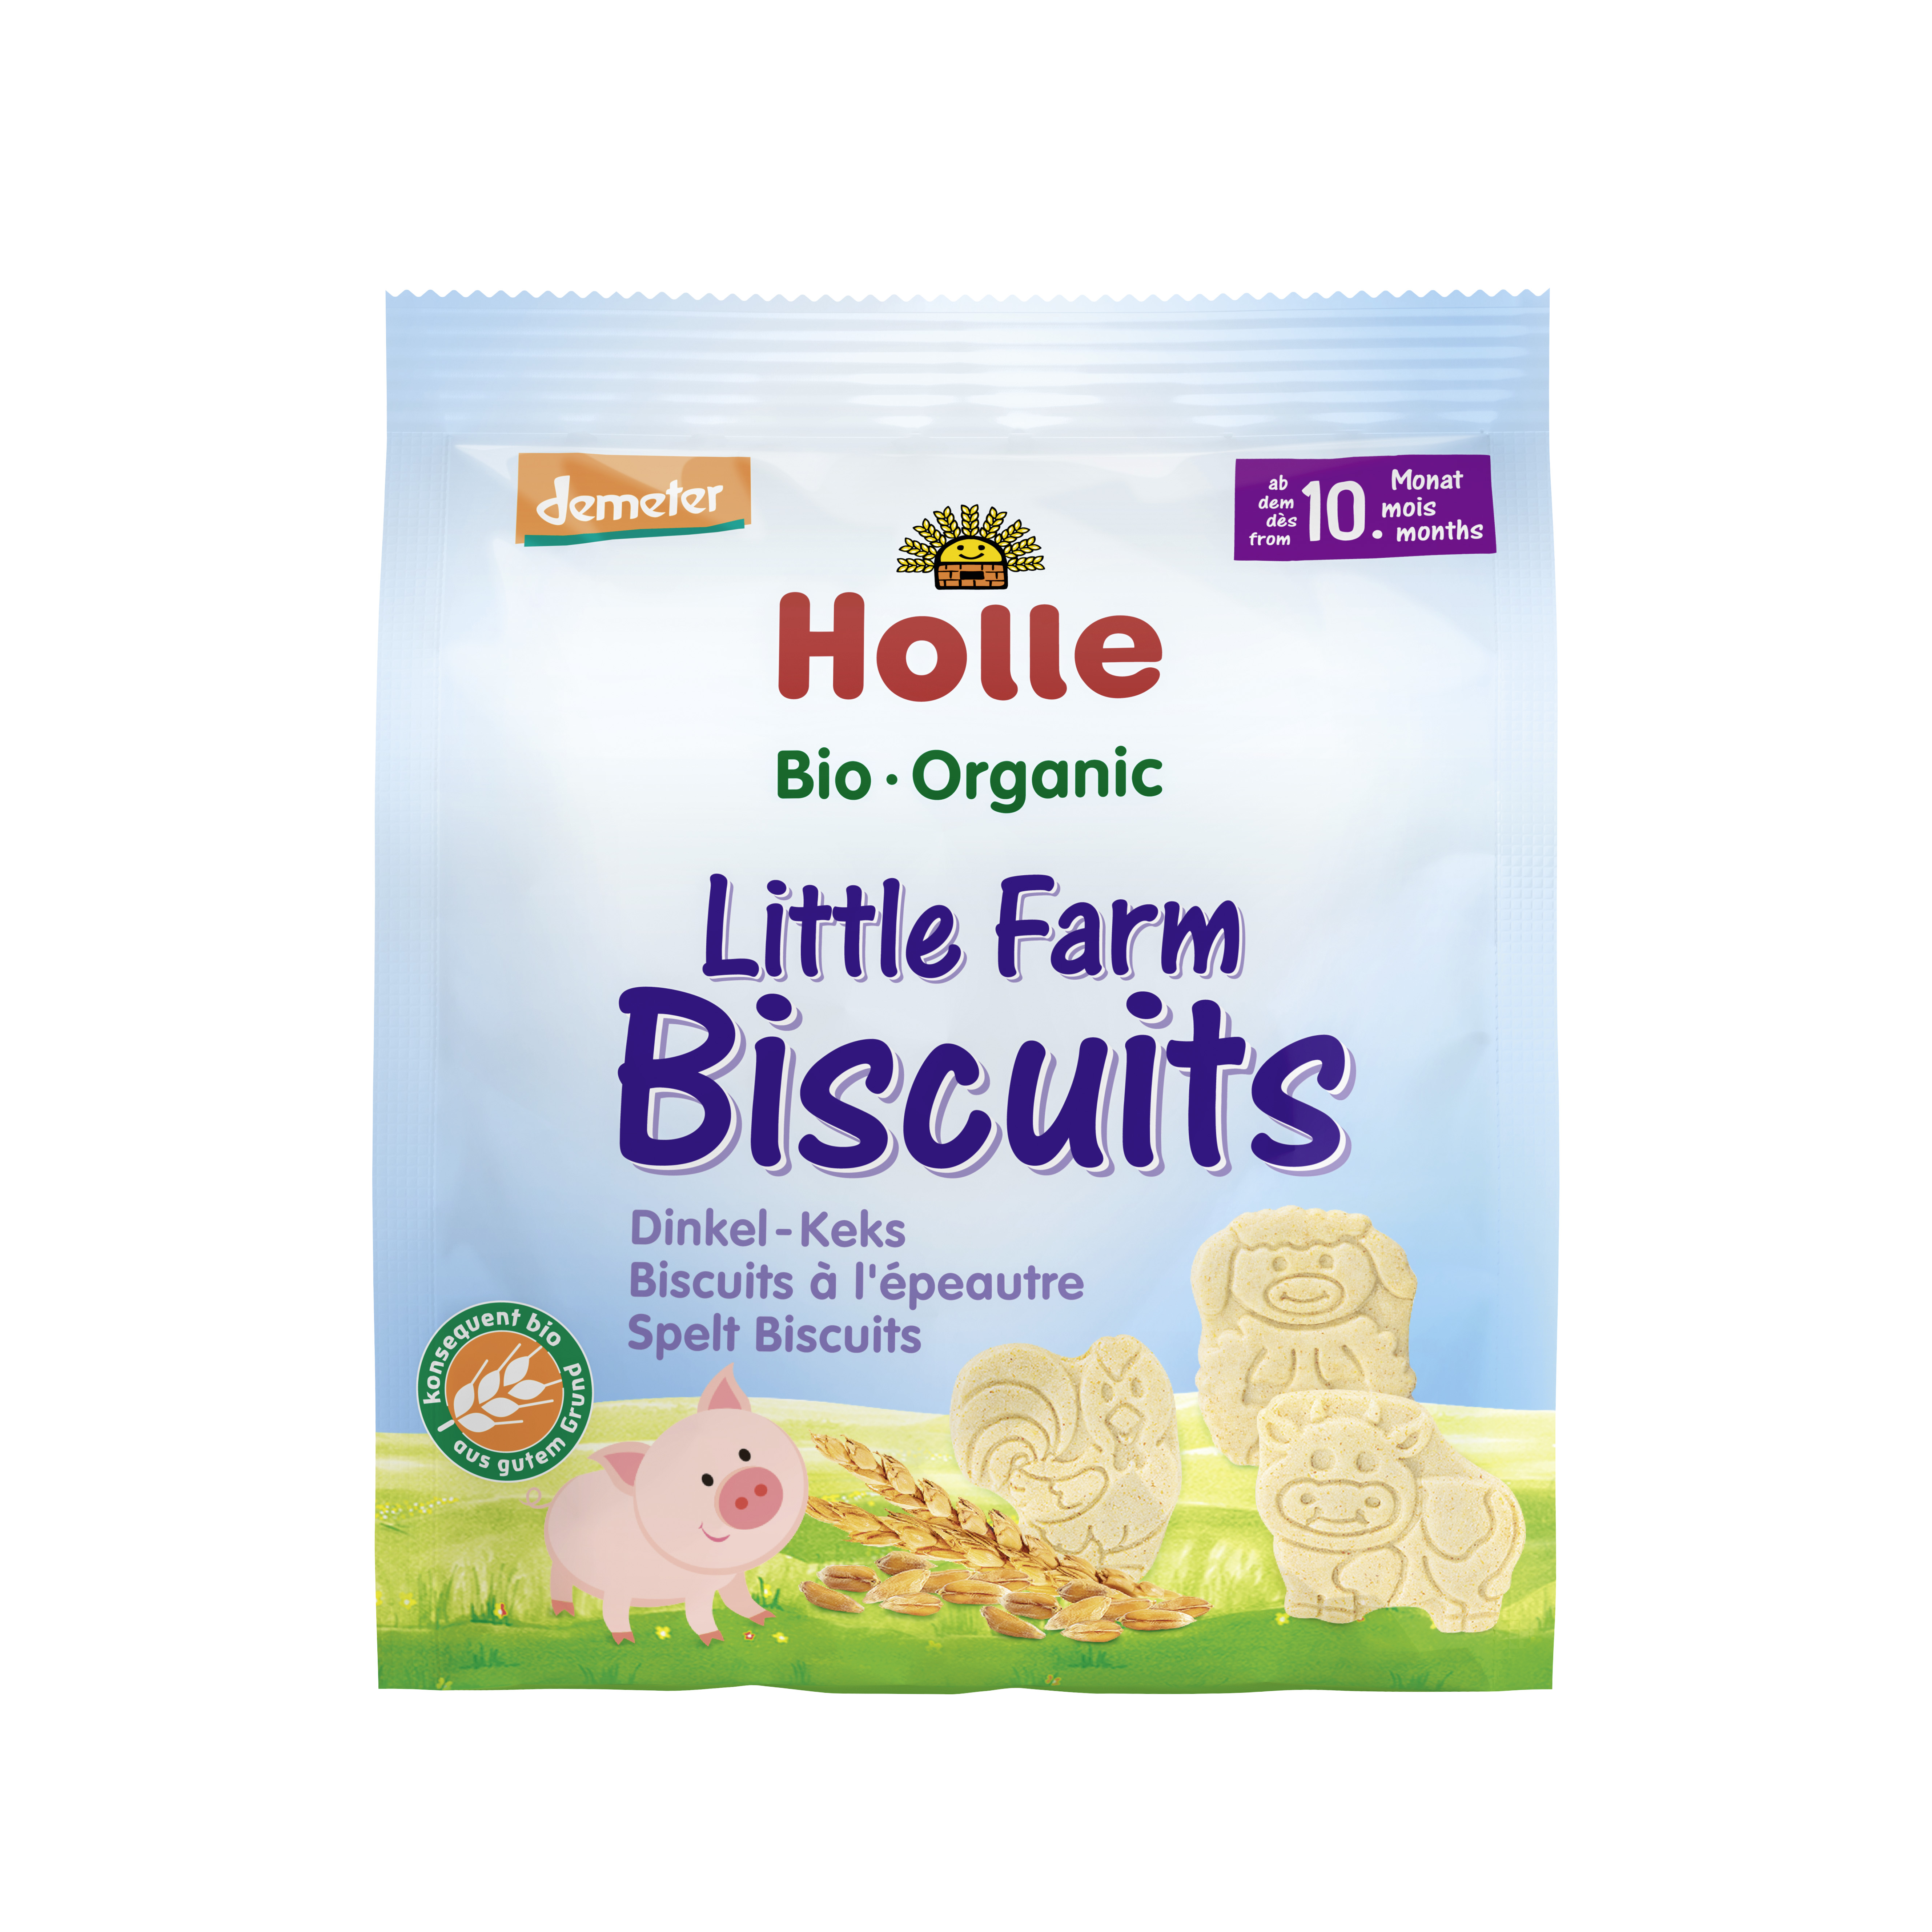 Little Farm biscuits